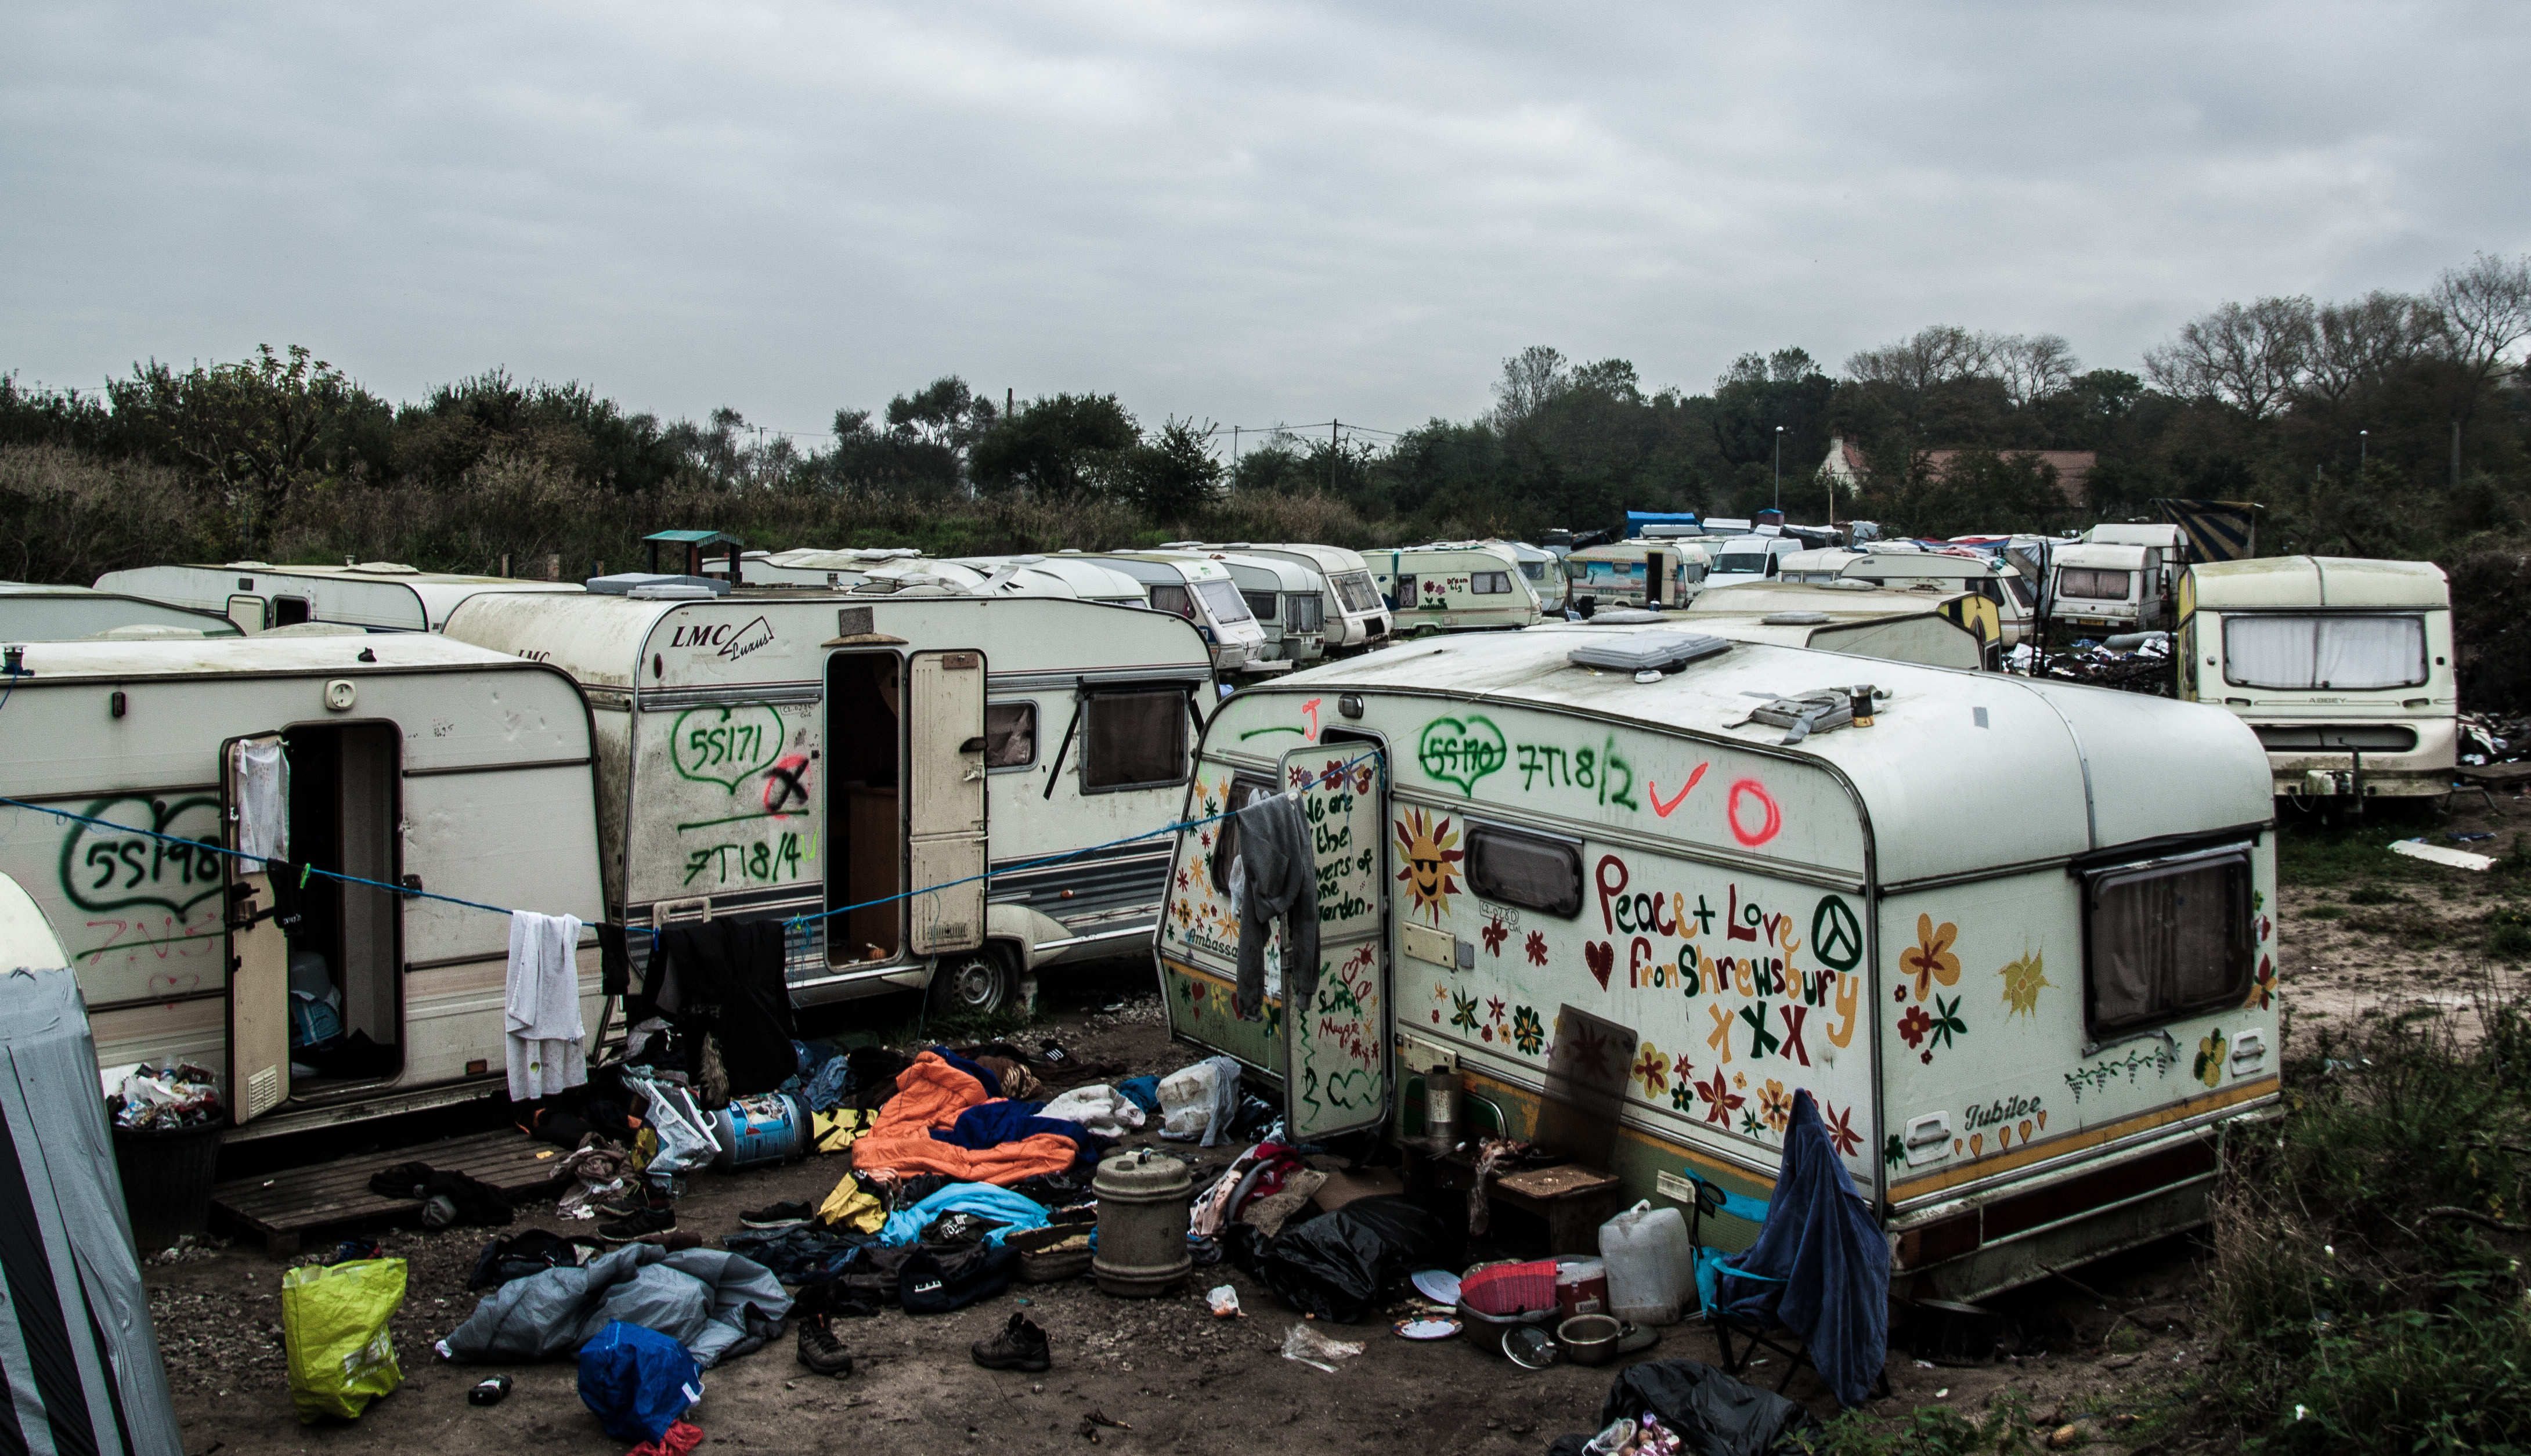 Trailers housing refugees in Calais, after the camp was demolished. Photograph by Paul Lorgerie